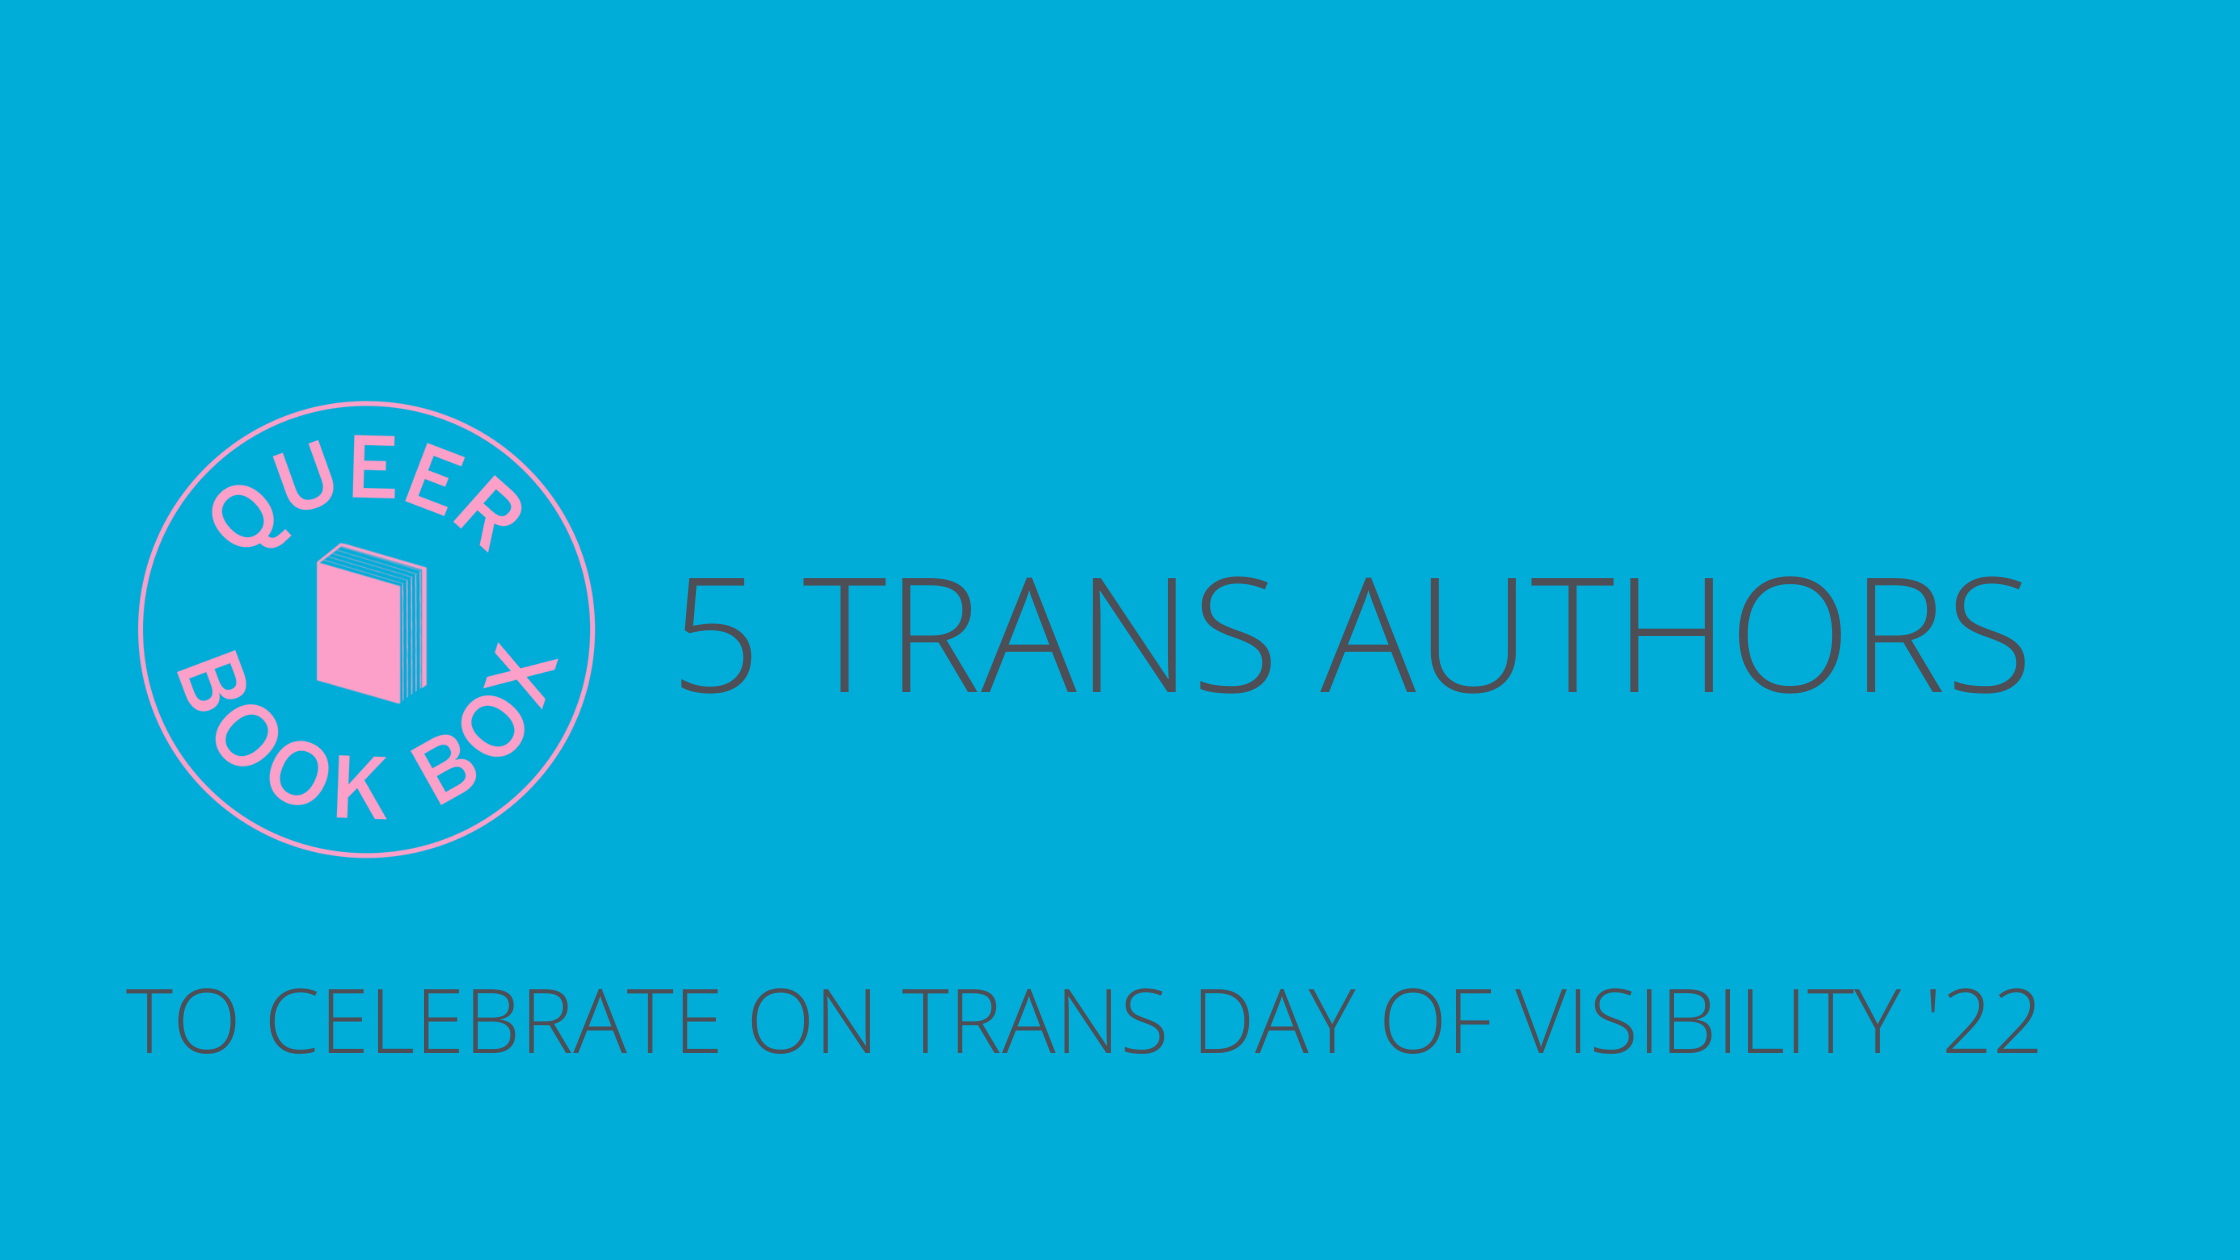 5 trans authors to celebrate on Trans Day of Visibility 2022